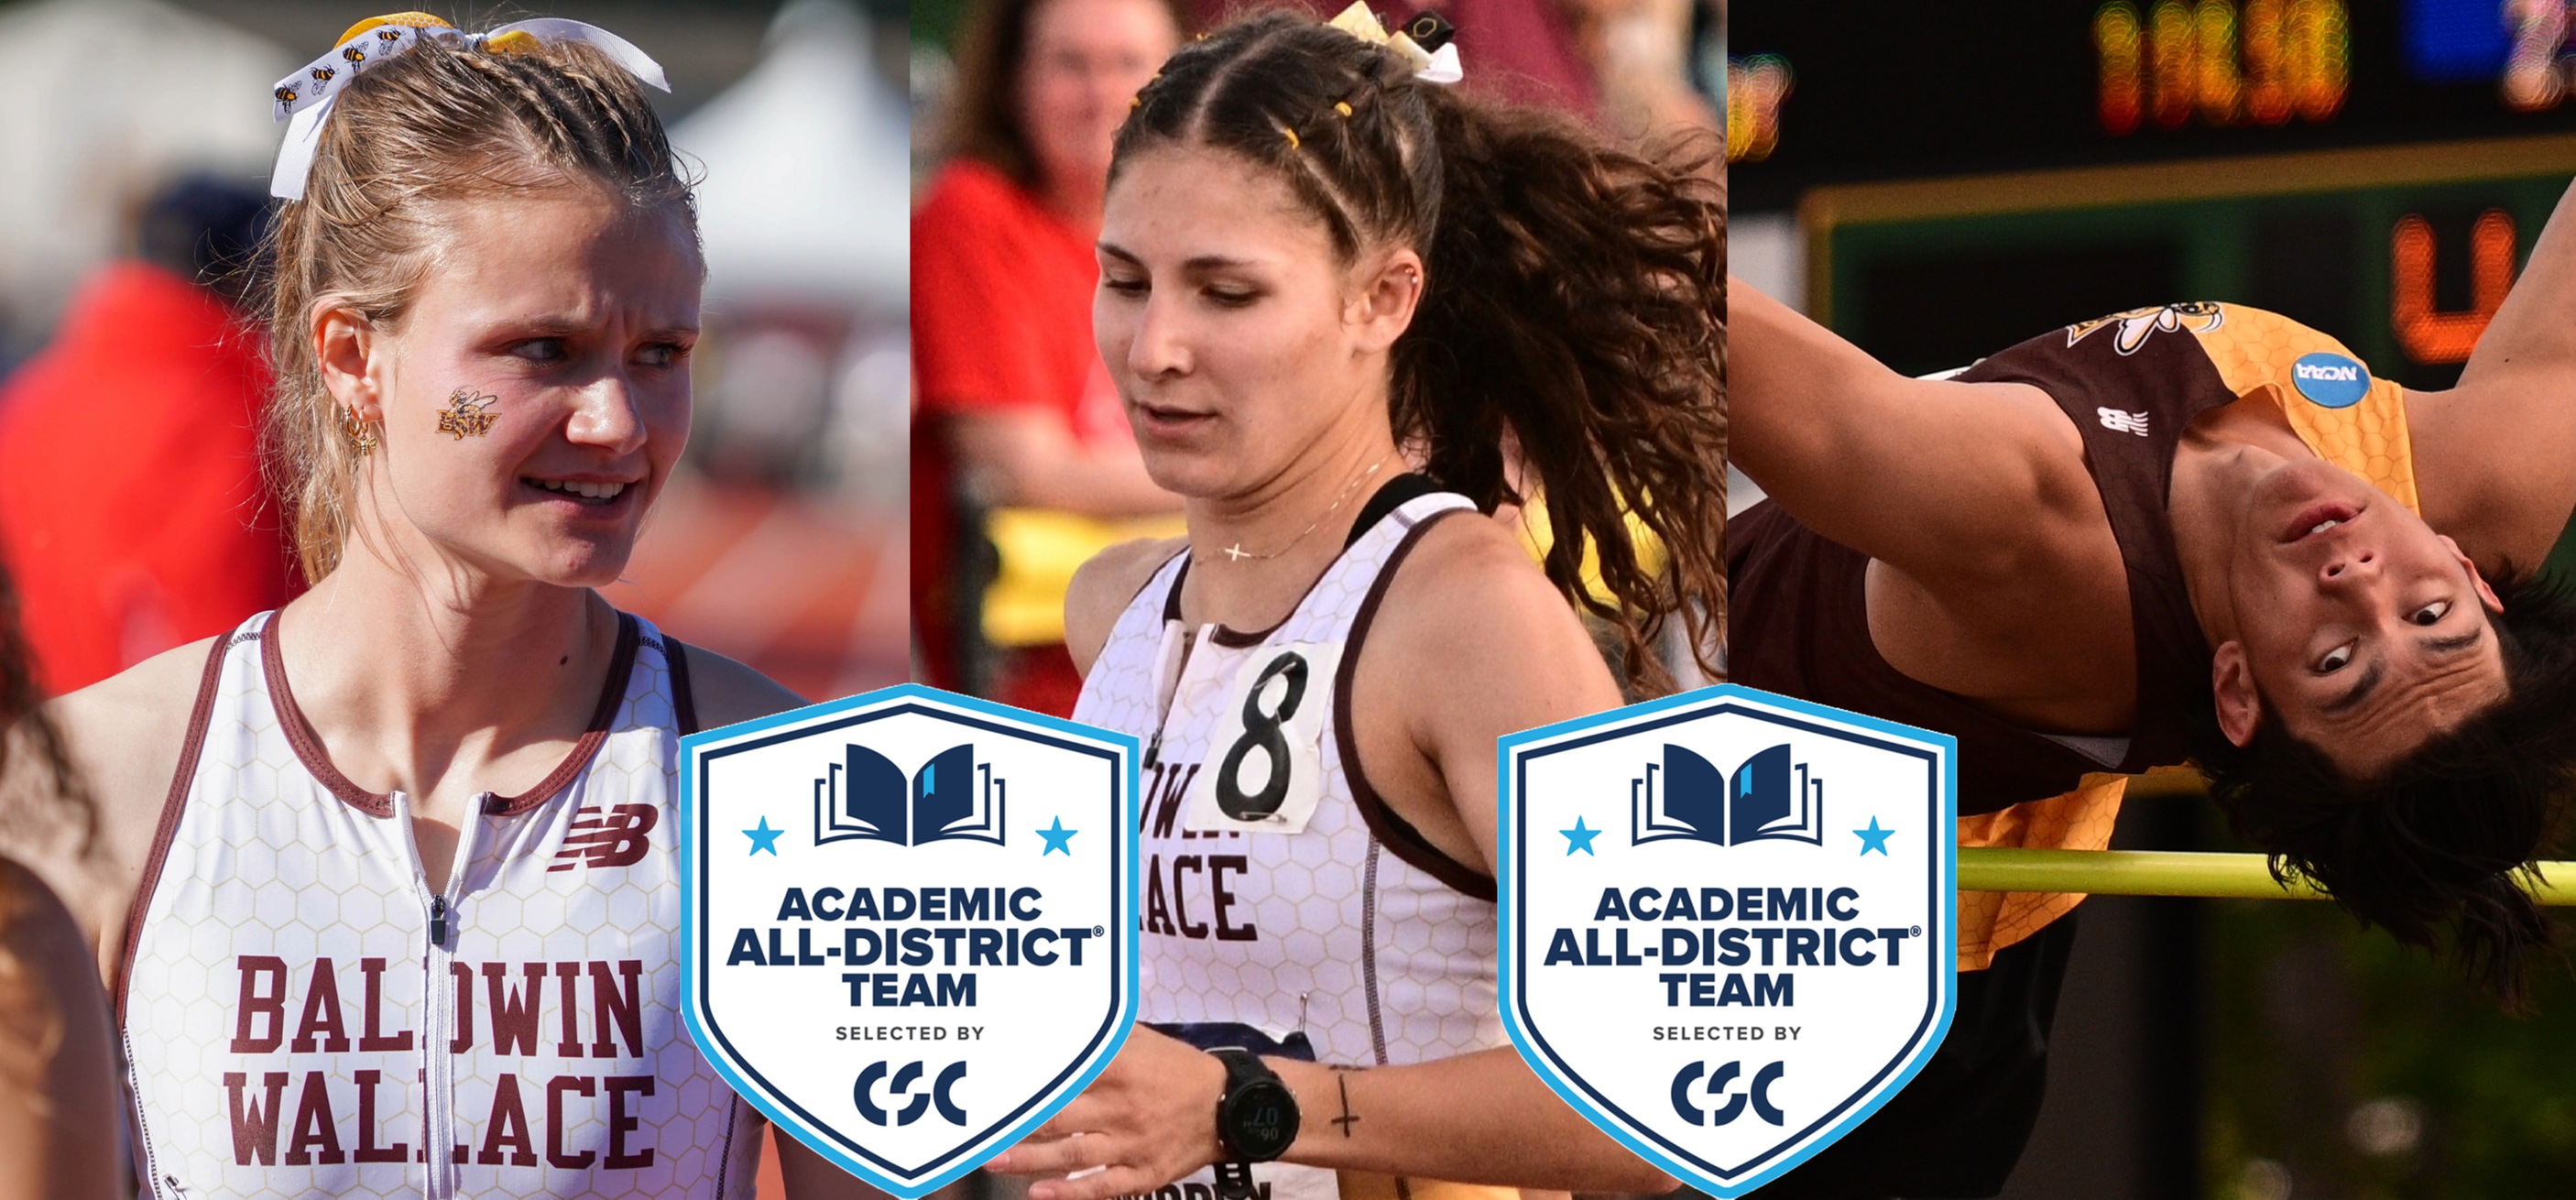 Three Cross Country and Track & Field Student-Athletes Selected to CSC Academic All-District Team